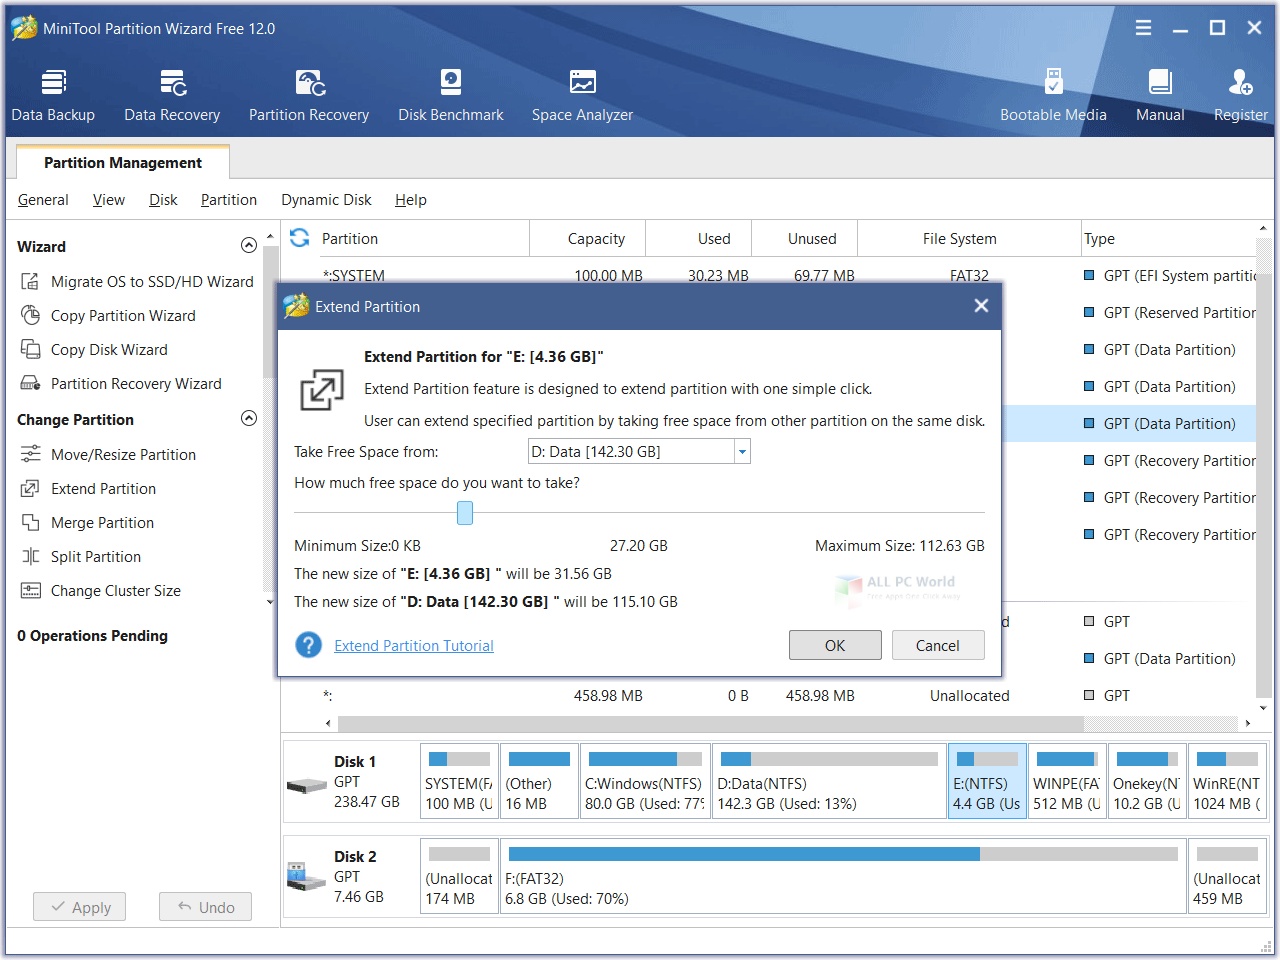 MiniTool Partition Wizard Pro / Free 12.8 download the new